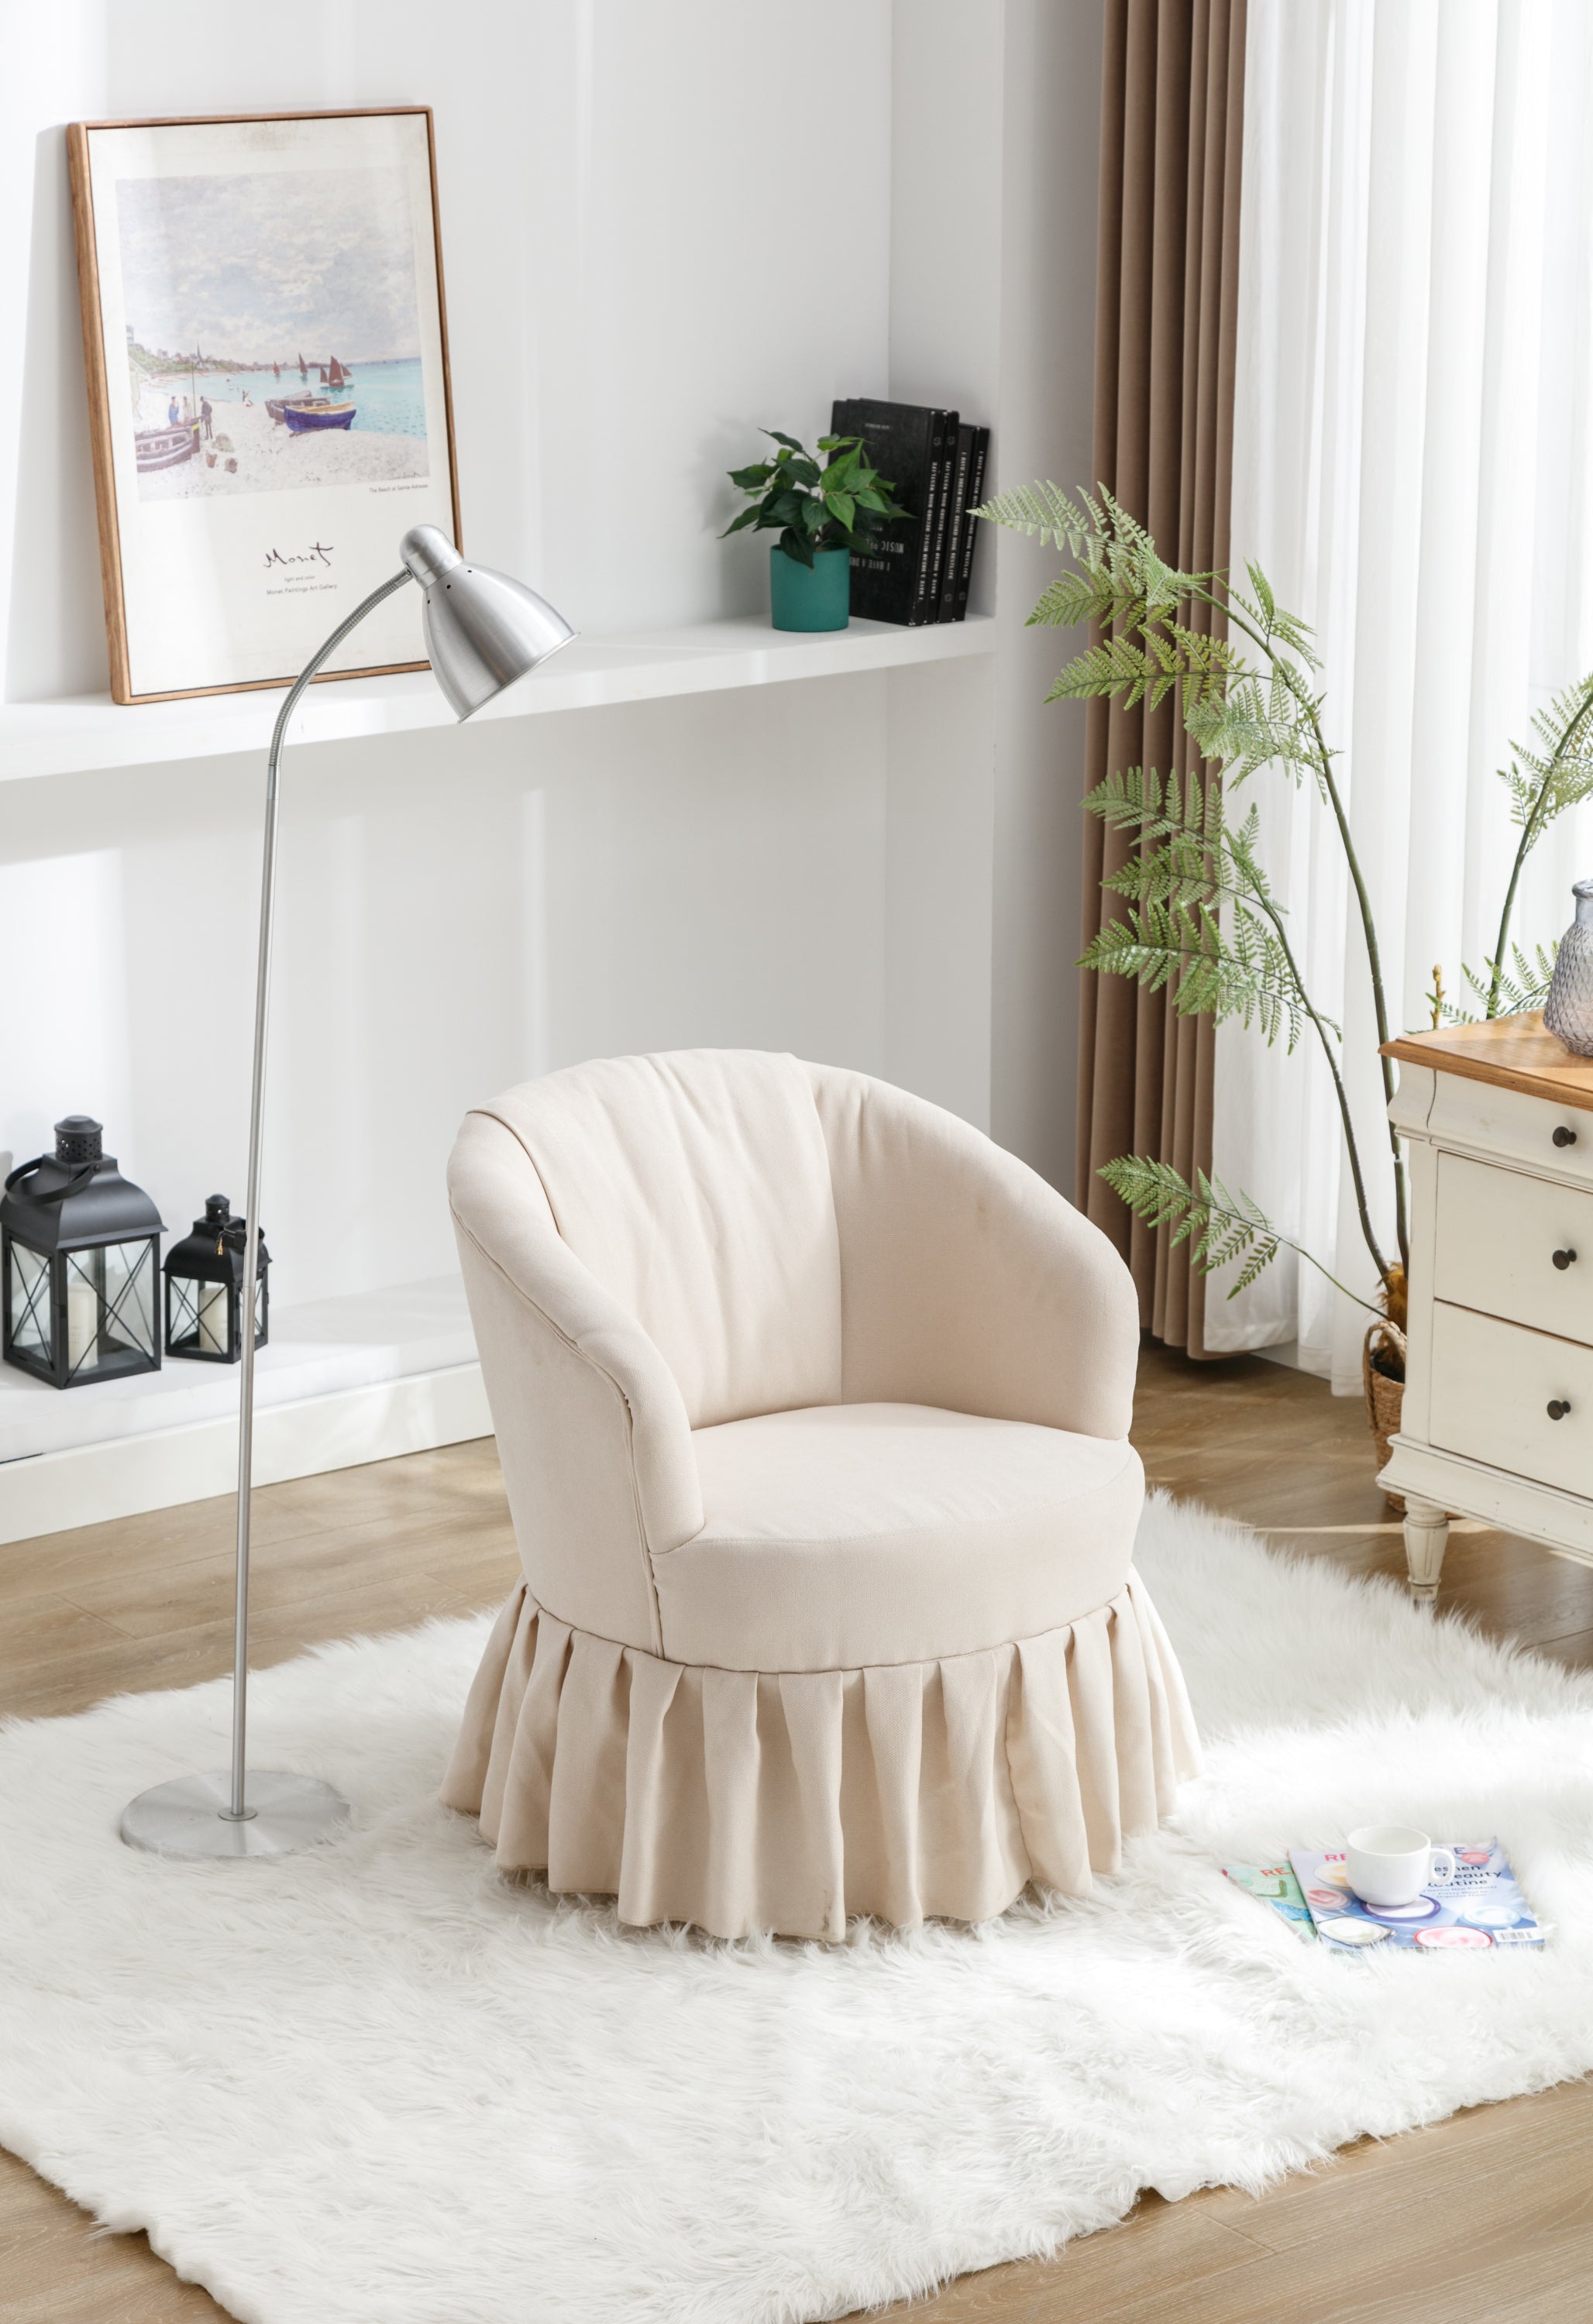 Linen Fabric Accent Swivel Chair Auditorium Chair With Pleated Skirt For Living Room Bedroom Auditorium,Beige